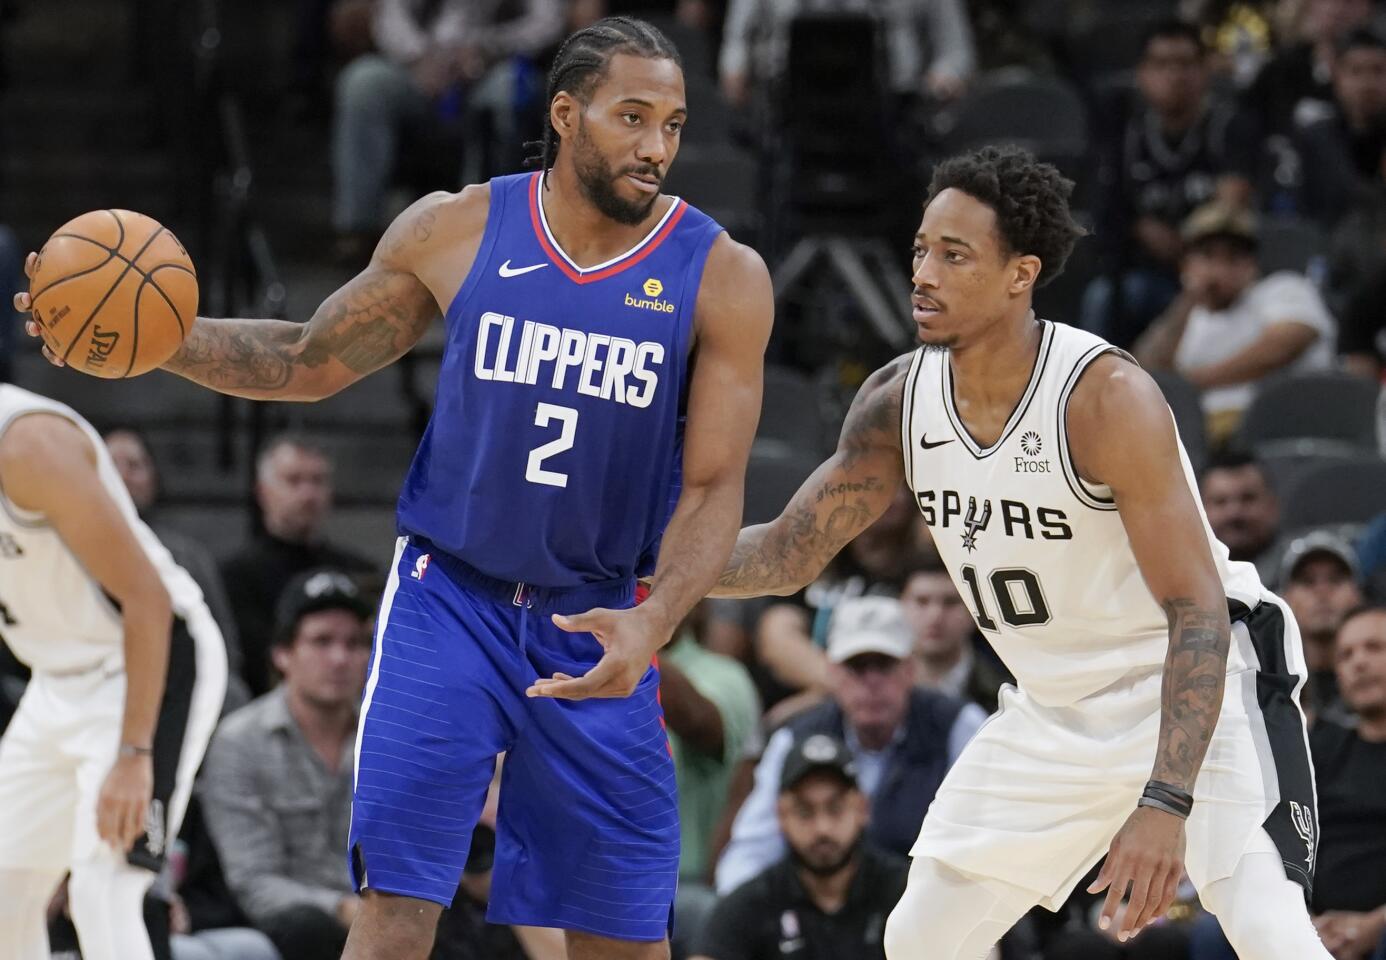 Clippers forward Kawhi Leonard (2) looks to pass while being defended by Spurs guard DeMar DeRozan during the second half of a game Nov. 29. n NBA basketball game, Friday, Nov. 29, 2019, in San Antonio. (AP Photo/Darren Abate)